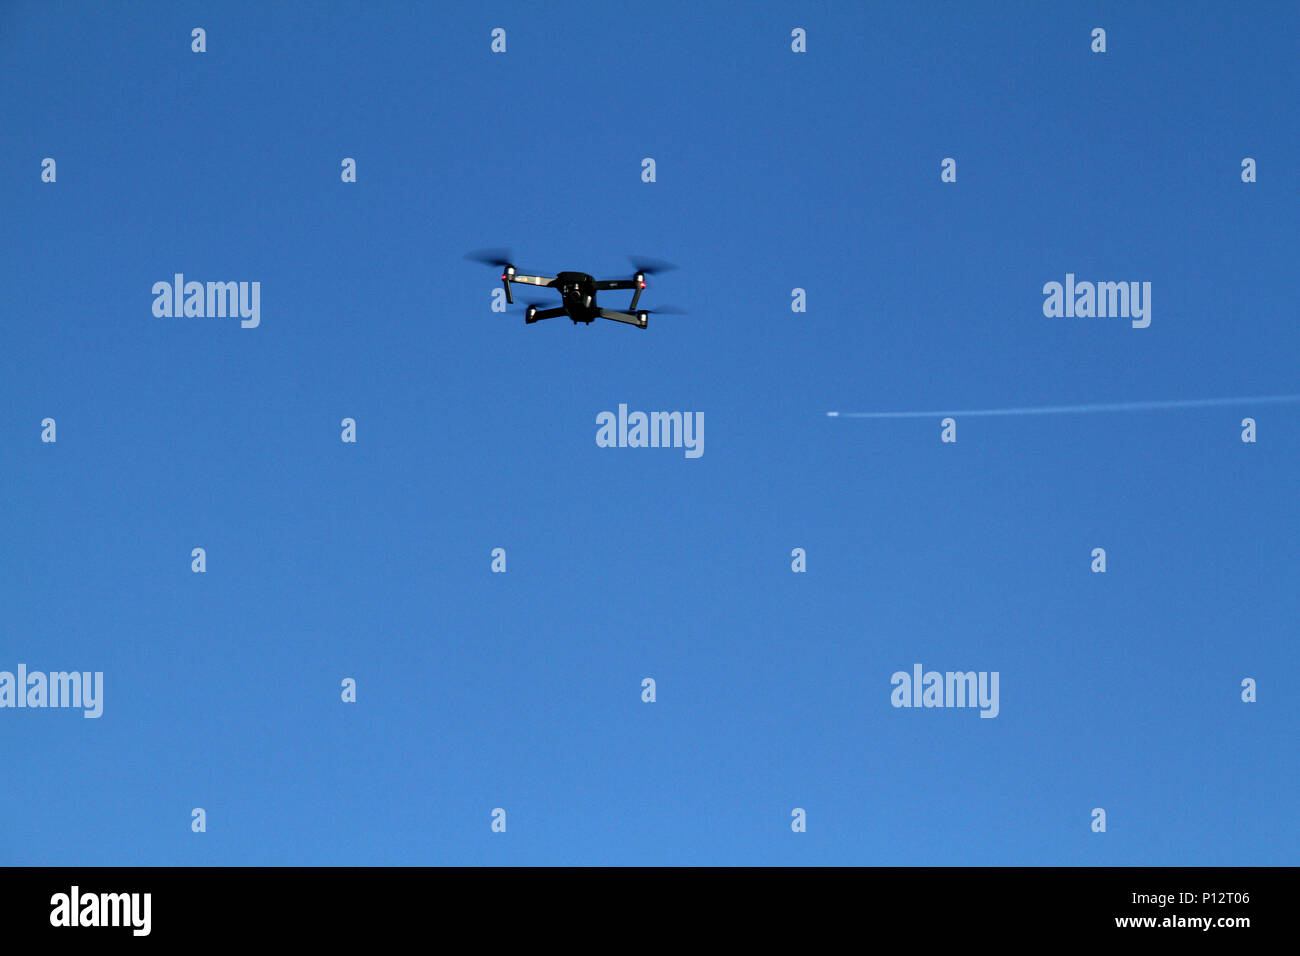 Drone flying, with airplane seen in background Stock Photo